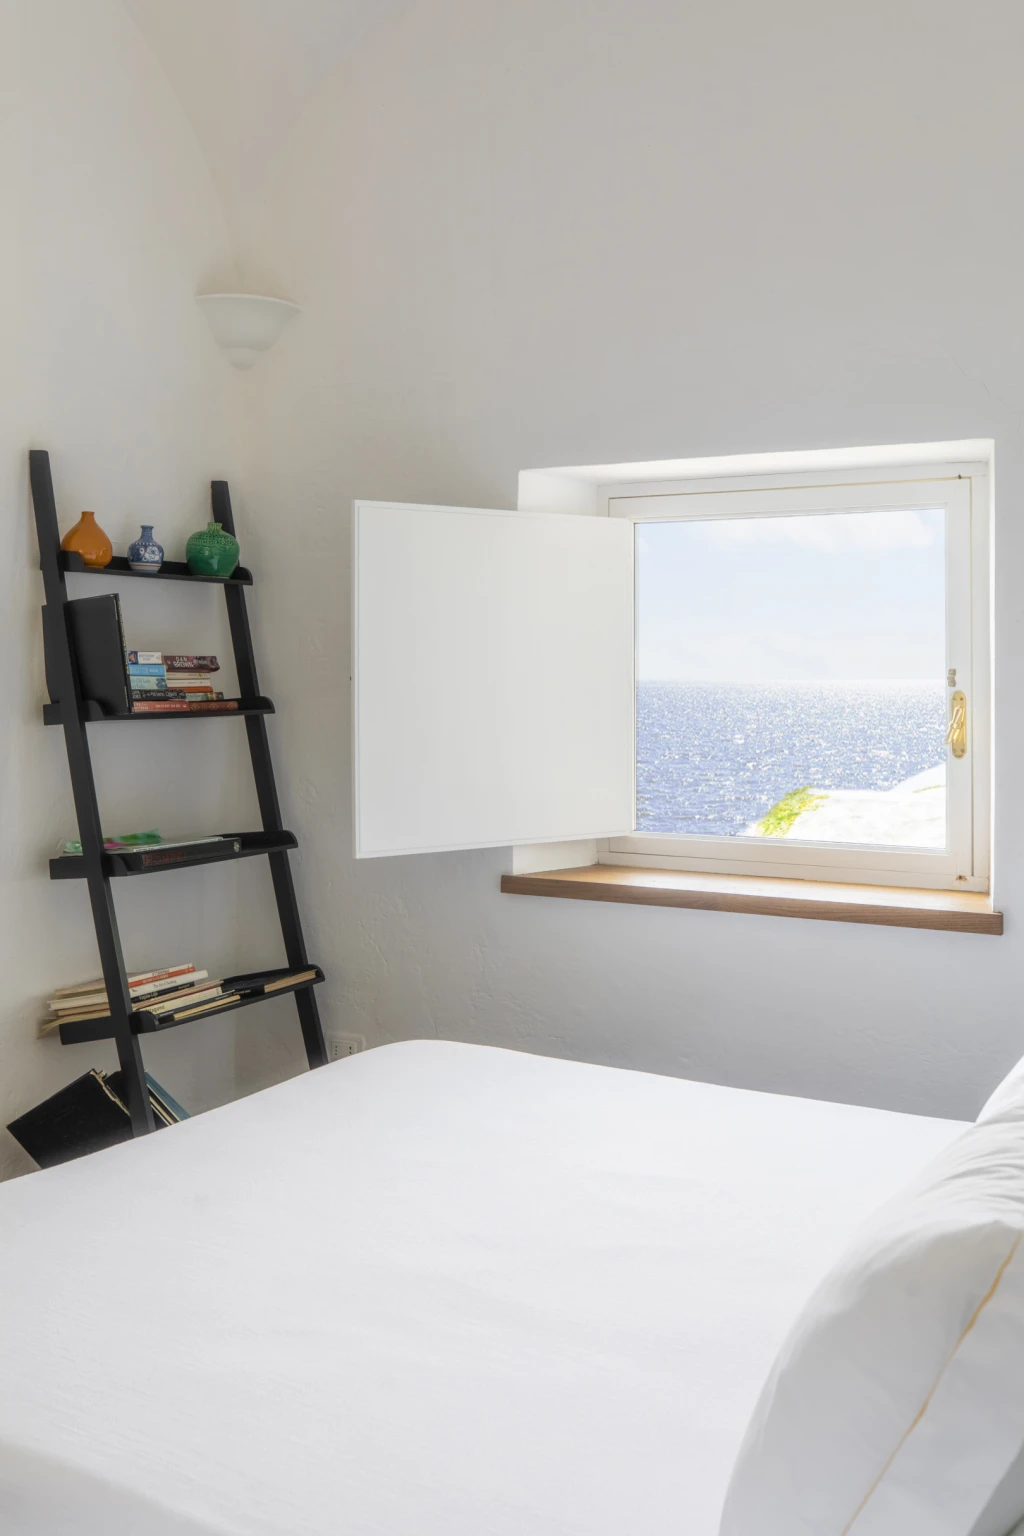 A room with a views, a breathtaking view on the Amalfi coast